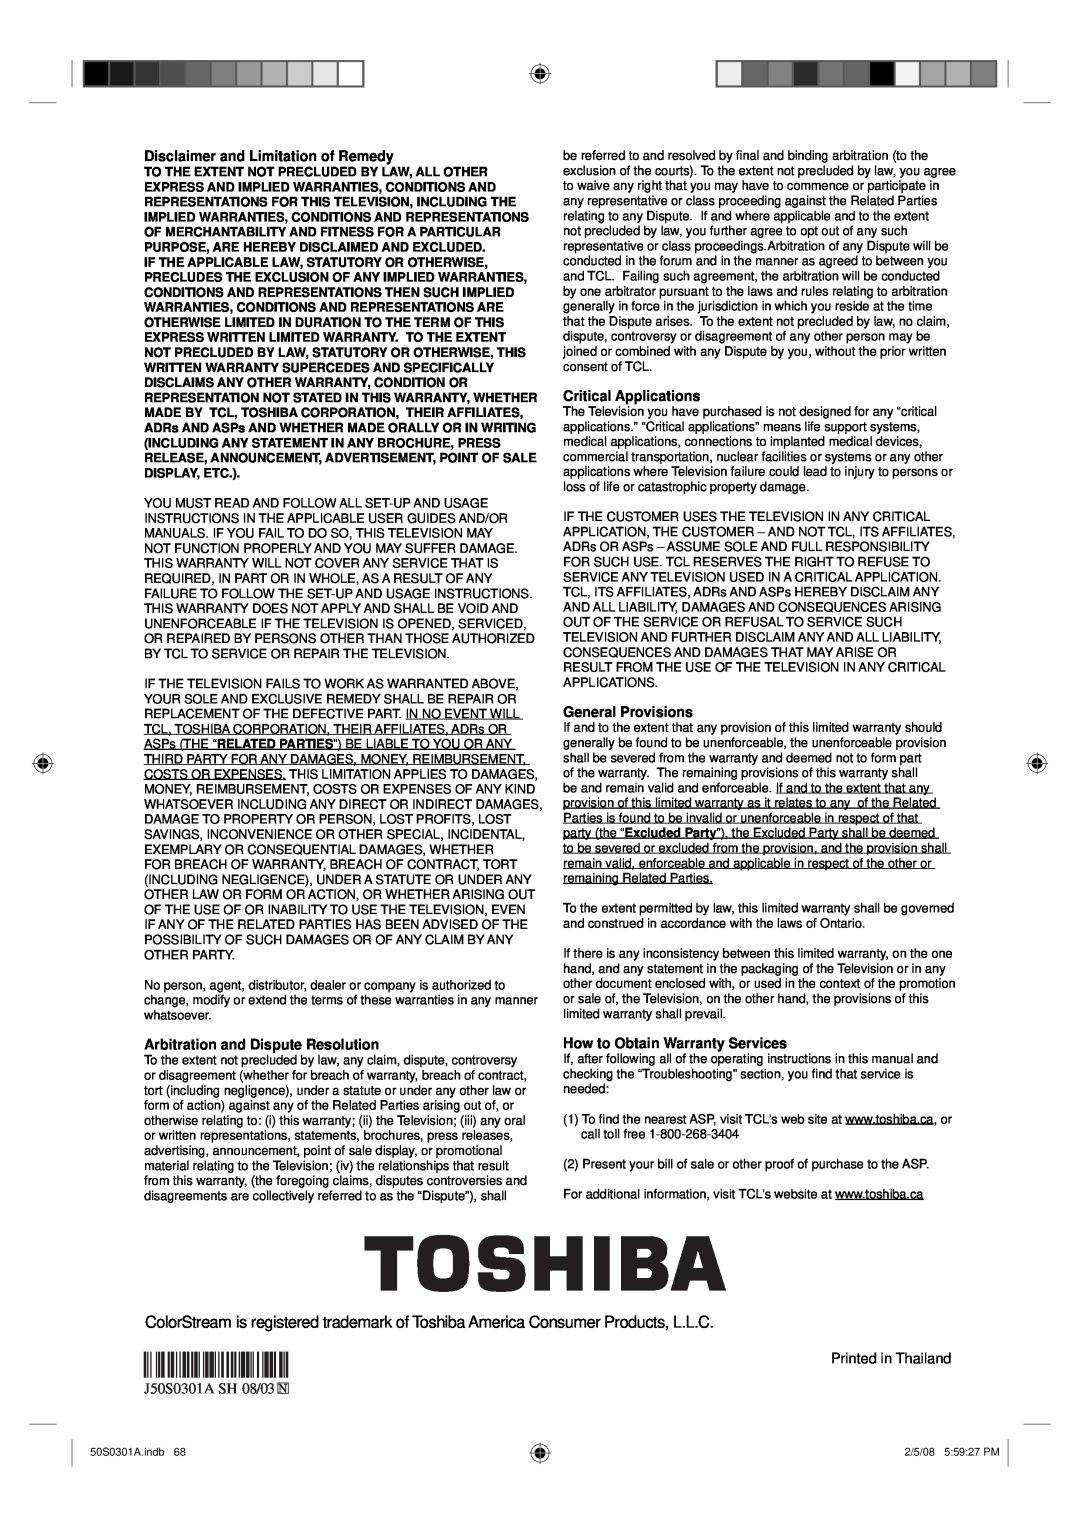 Toshiba 22LV505C Disclaimer and Limitation of Remedy, Critical Applications, General Provisions, J50S0301A SH 08/03 N 